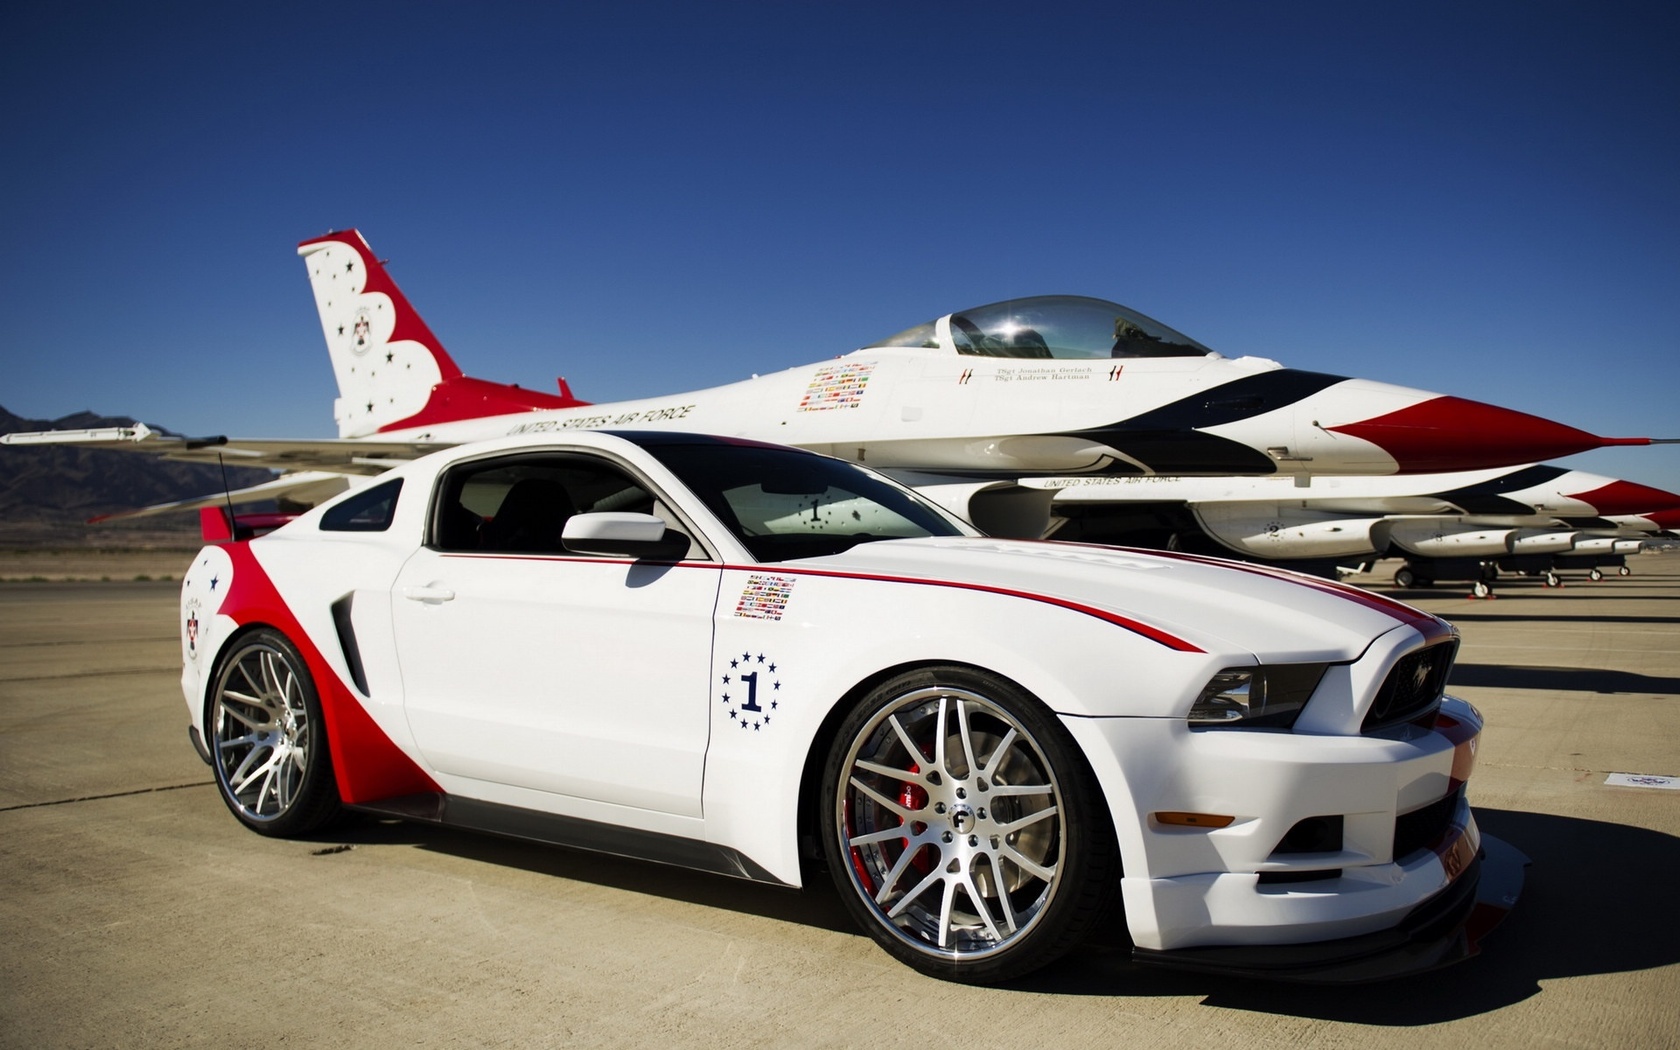 Red and white Ford Mustang GT near the airplane Widescreen Wallpaper ...